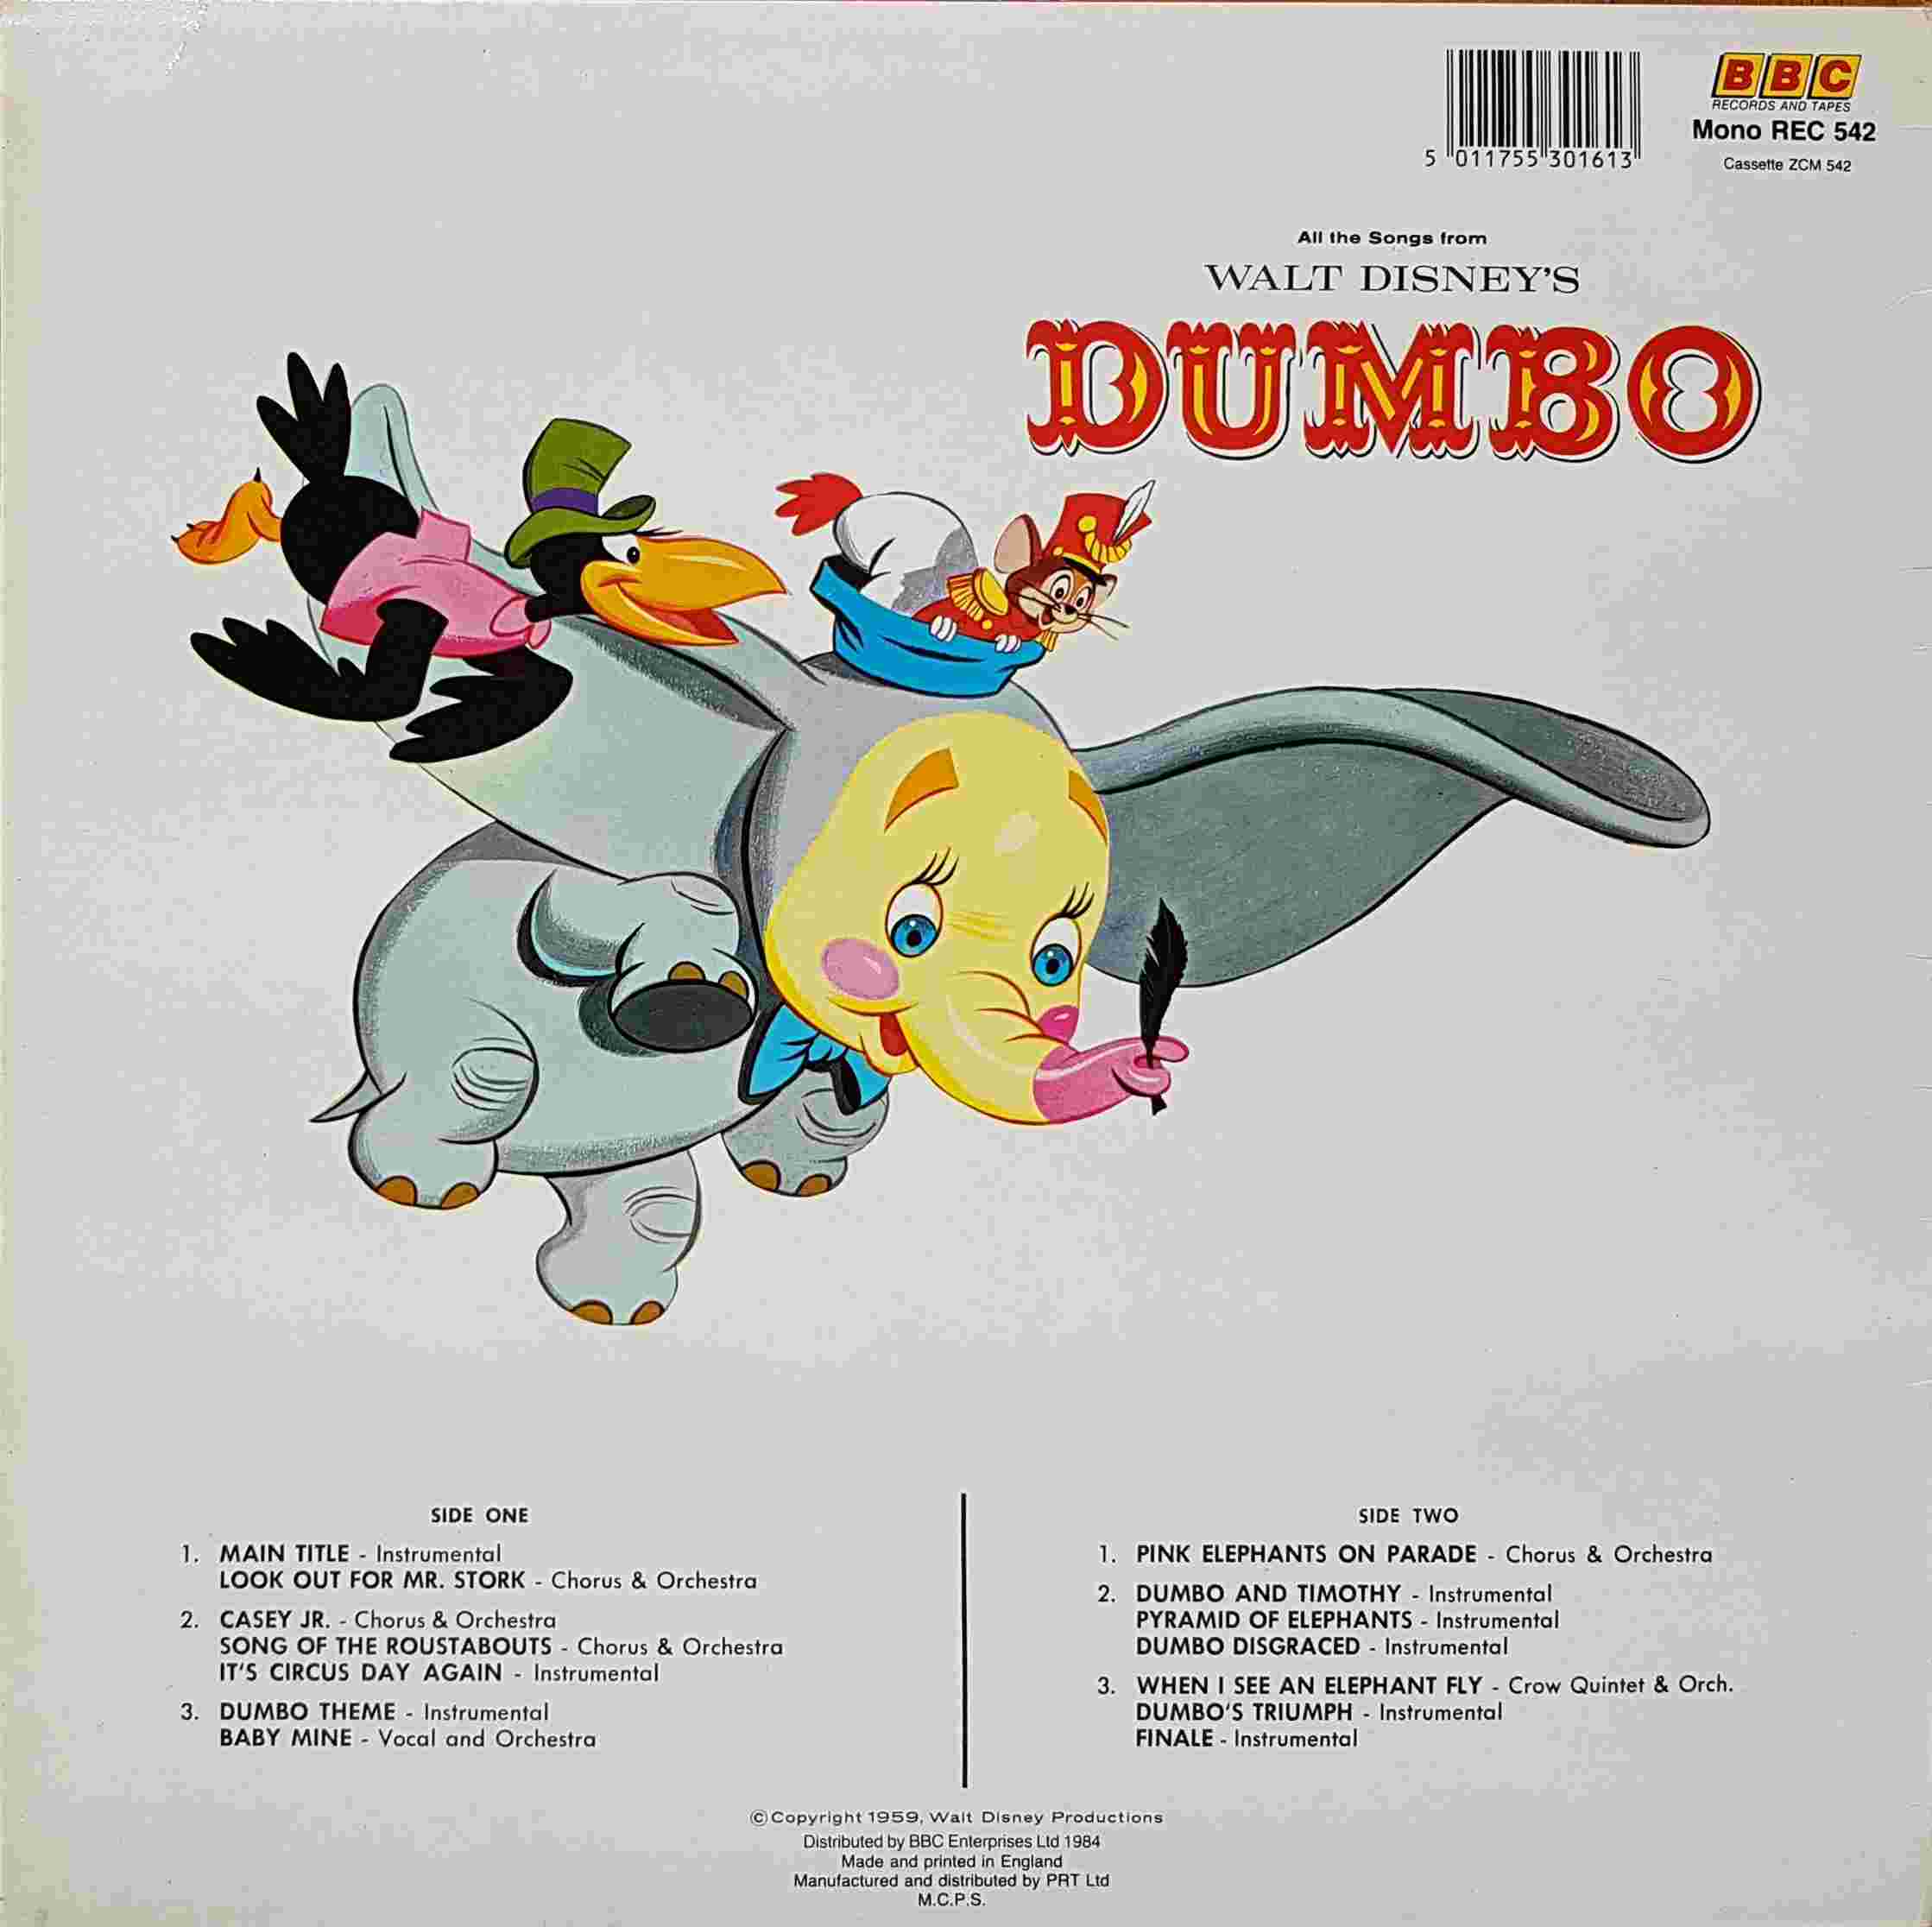 Picture of REC 542 Dumbo by artist Washington / Churchill from the BBC records and Tapes library